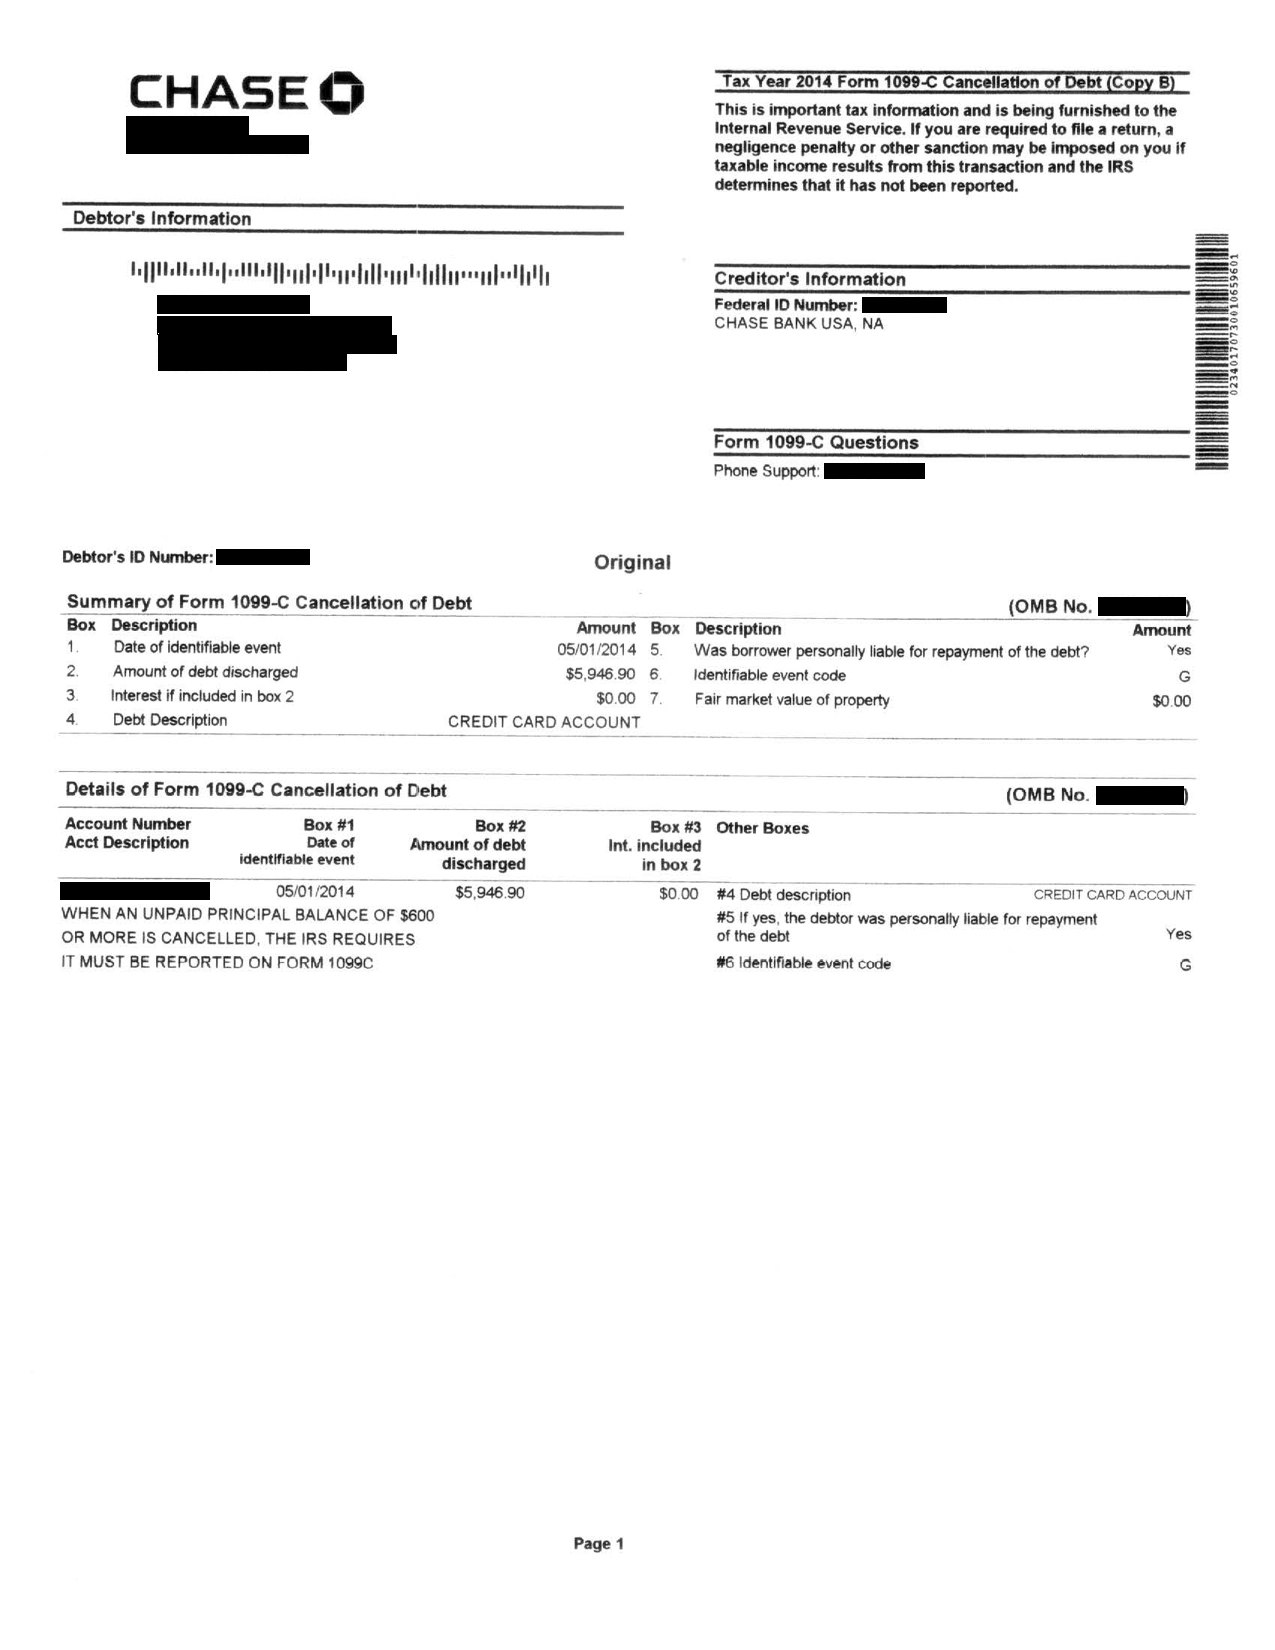 Image of a settlement letter with Chase Bank USA America with a savings of 5,946 dollars